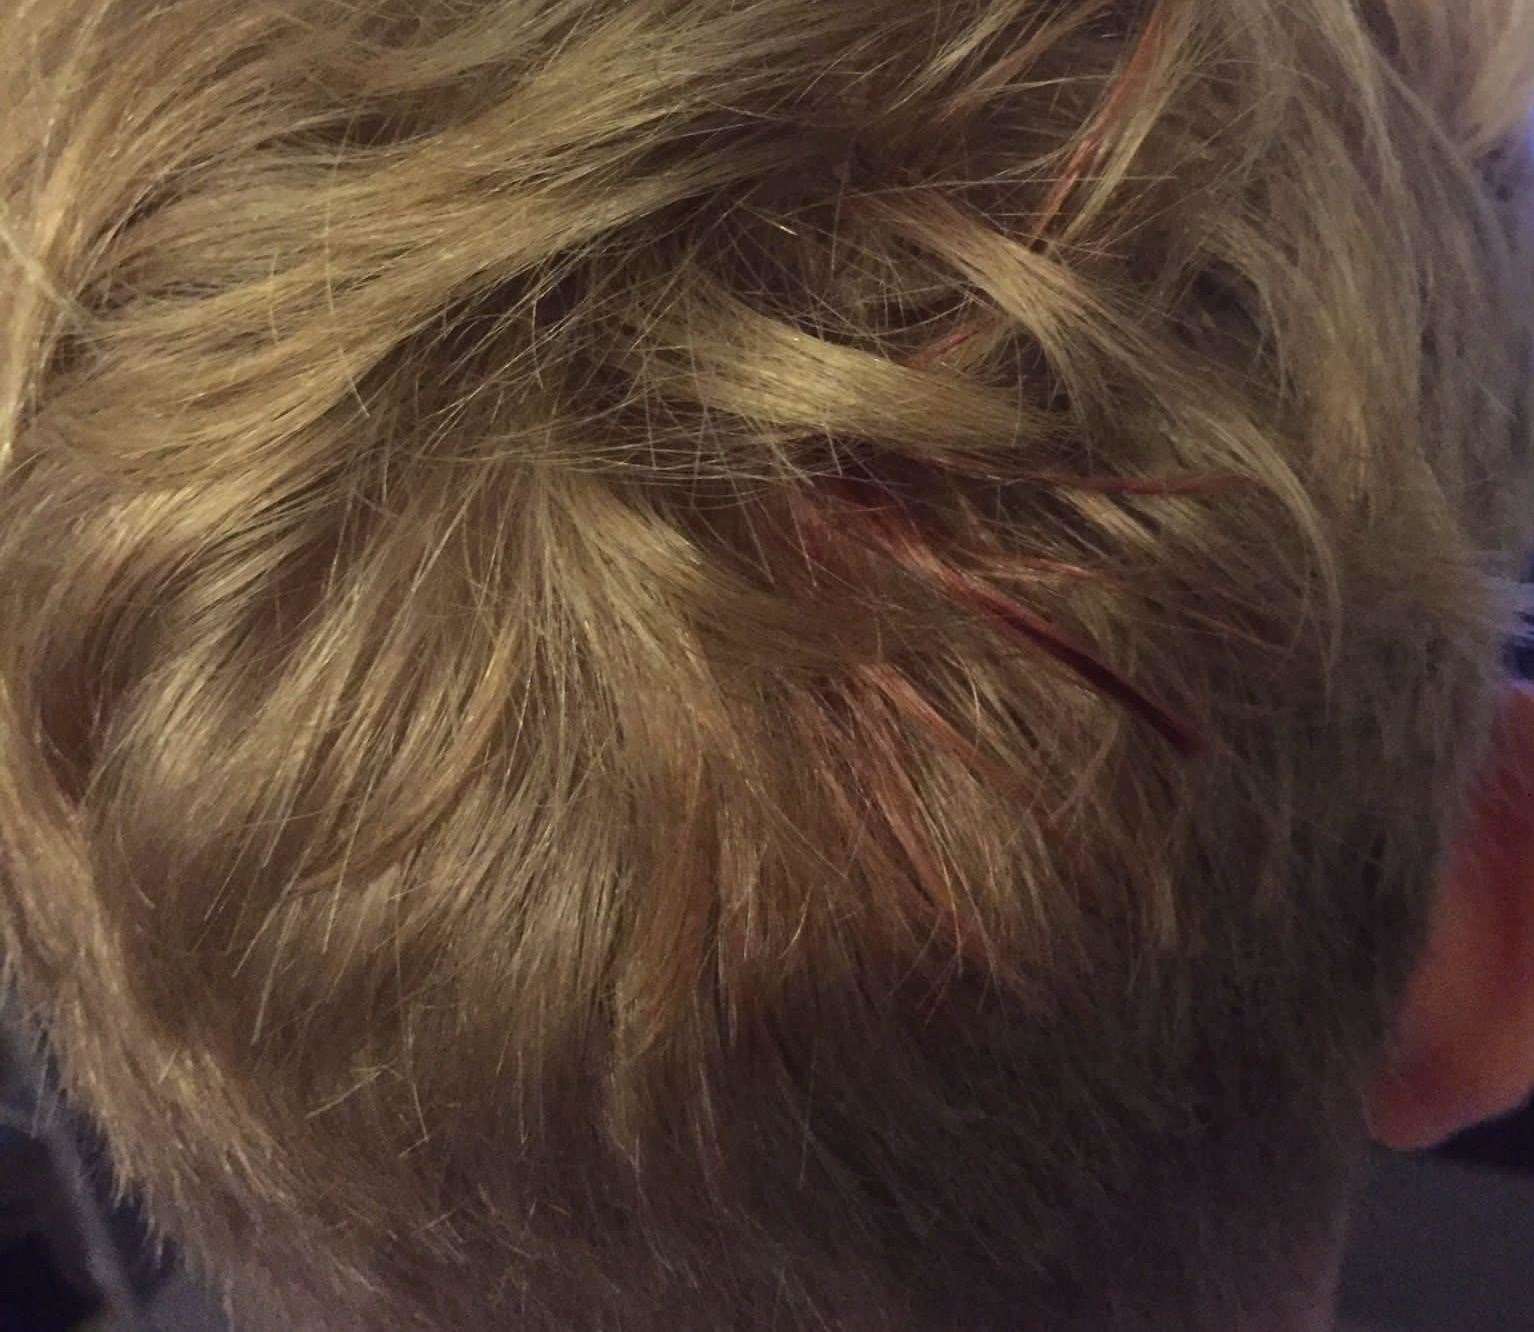 An 11-year-old was left bleeding after a rock was thrown at his head at a bus stop. Picture: Debbie-ann Griffiths